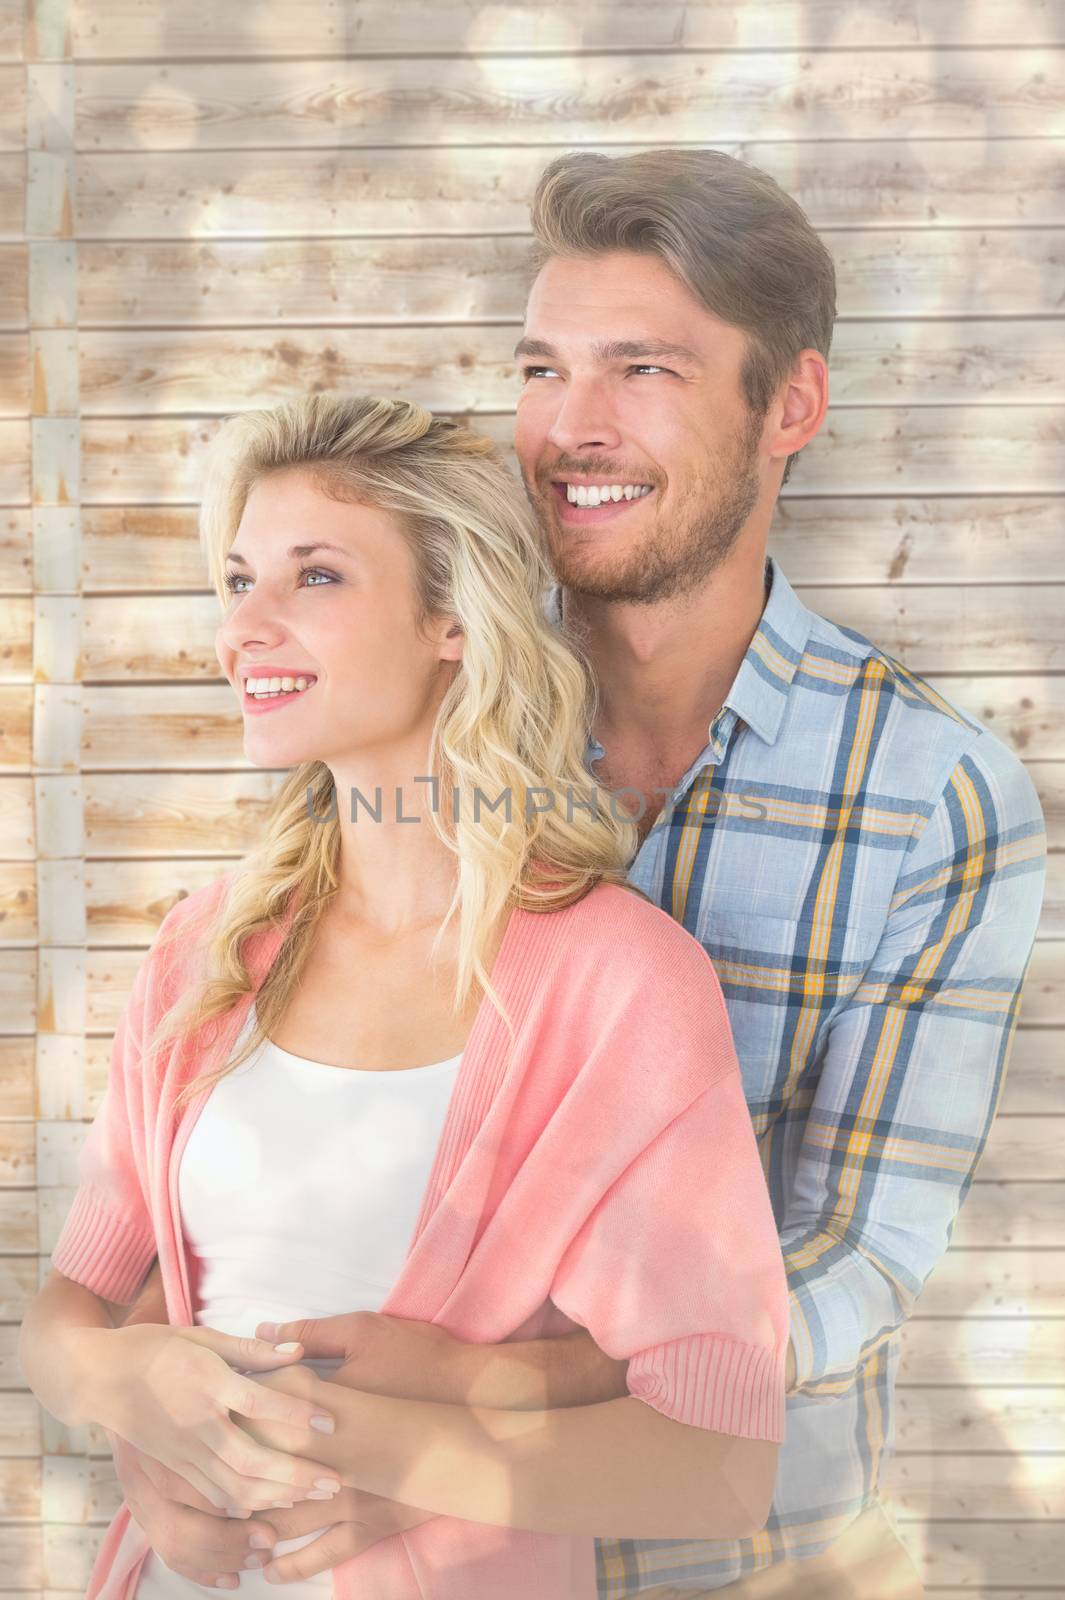 Attractive young couple embracing and smiling against light glowing dots design pattern